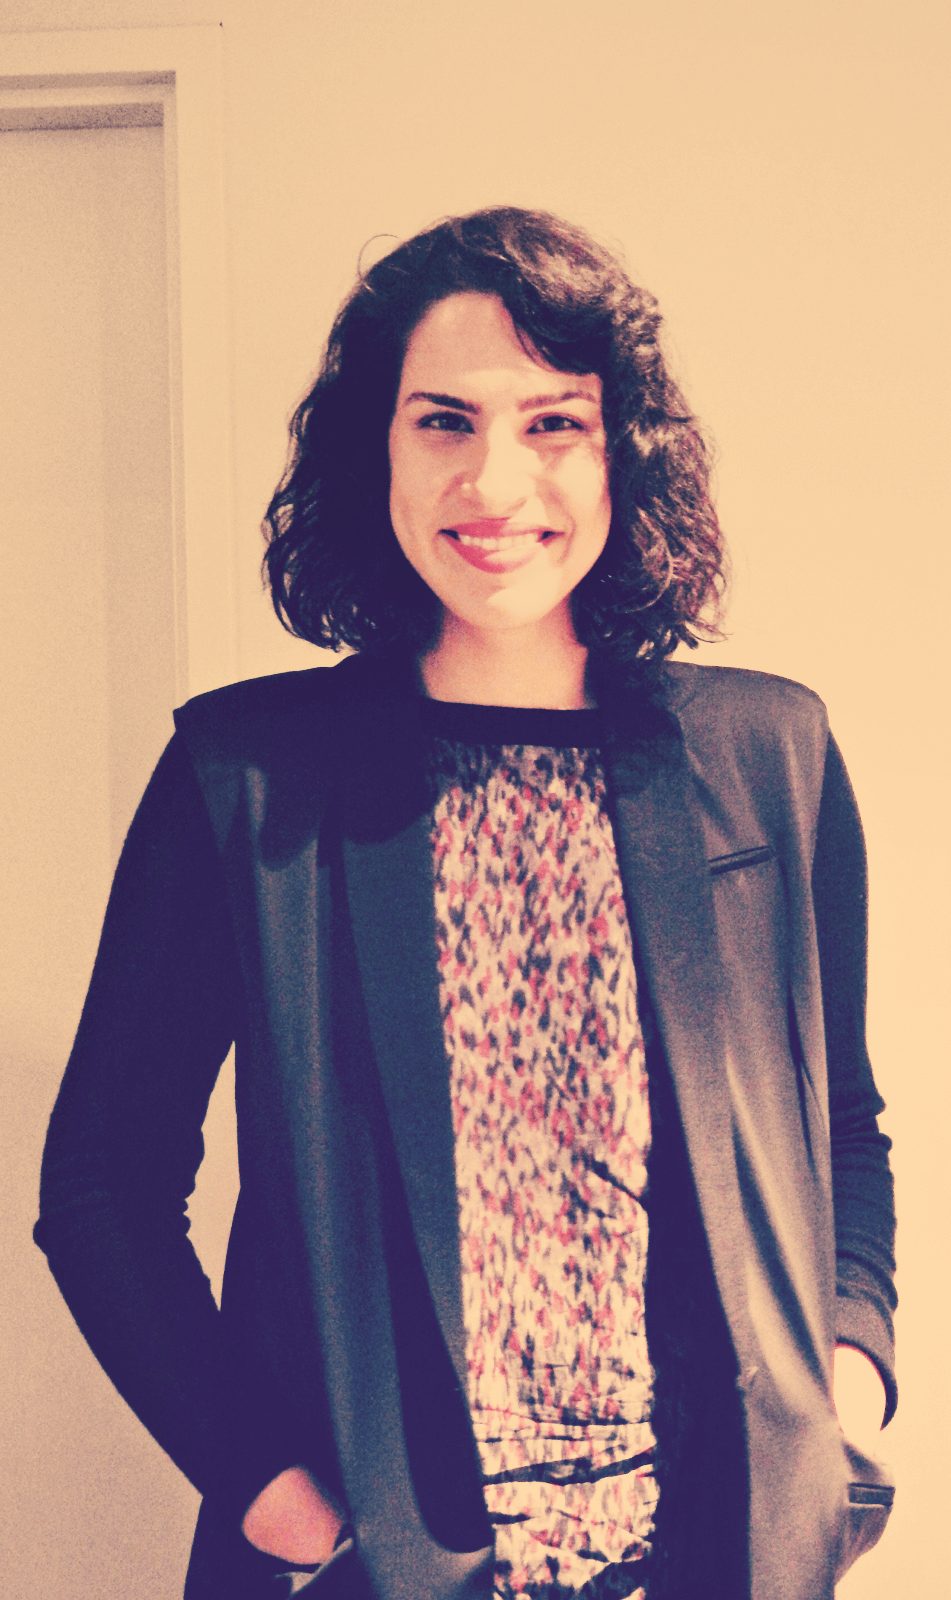 Desiree Akhavan before the premiere of her film at the Sydney Film Festival on Friday.